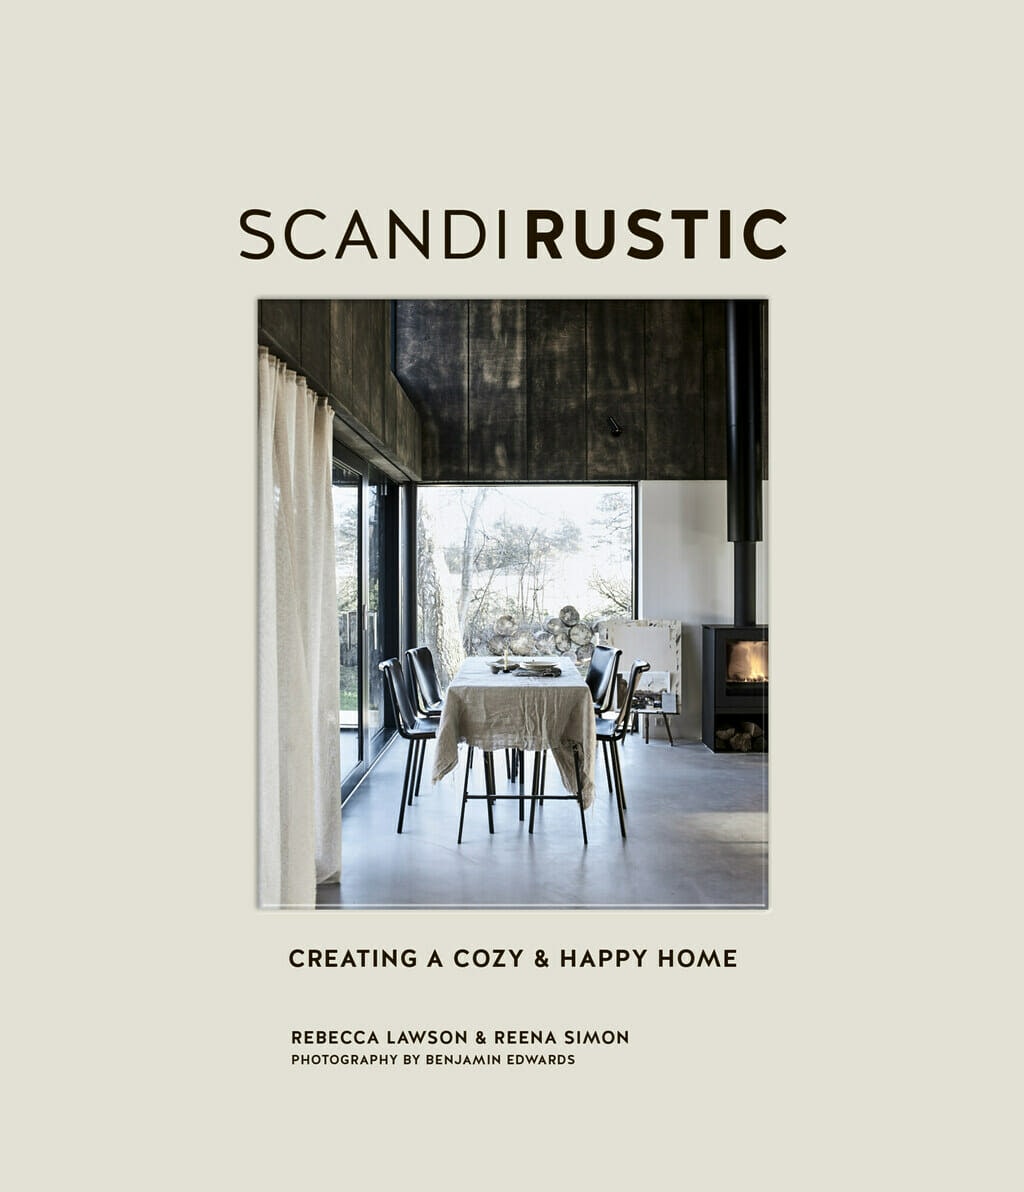 Scandi Rustic: Creating a Cozy and Happy Home by Rebecca Lawson and Rerena Simon. 